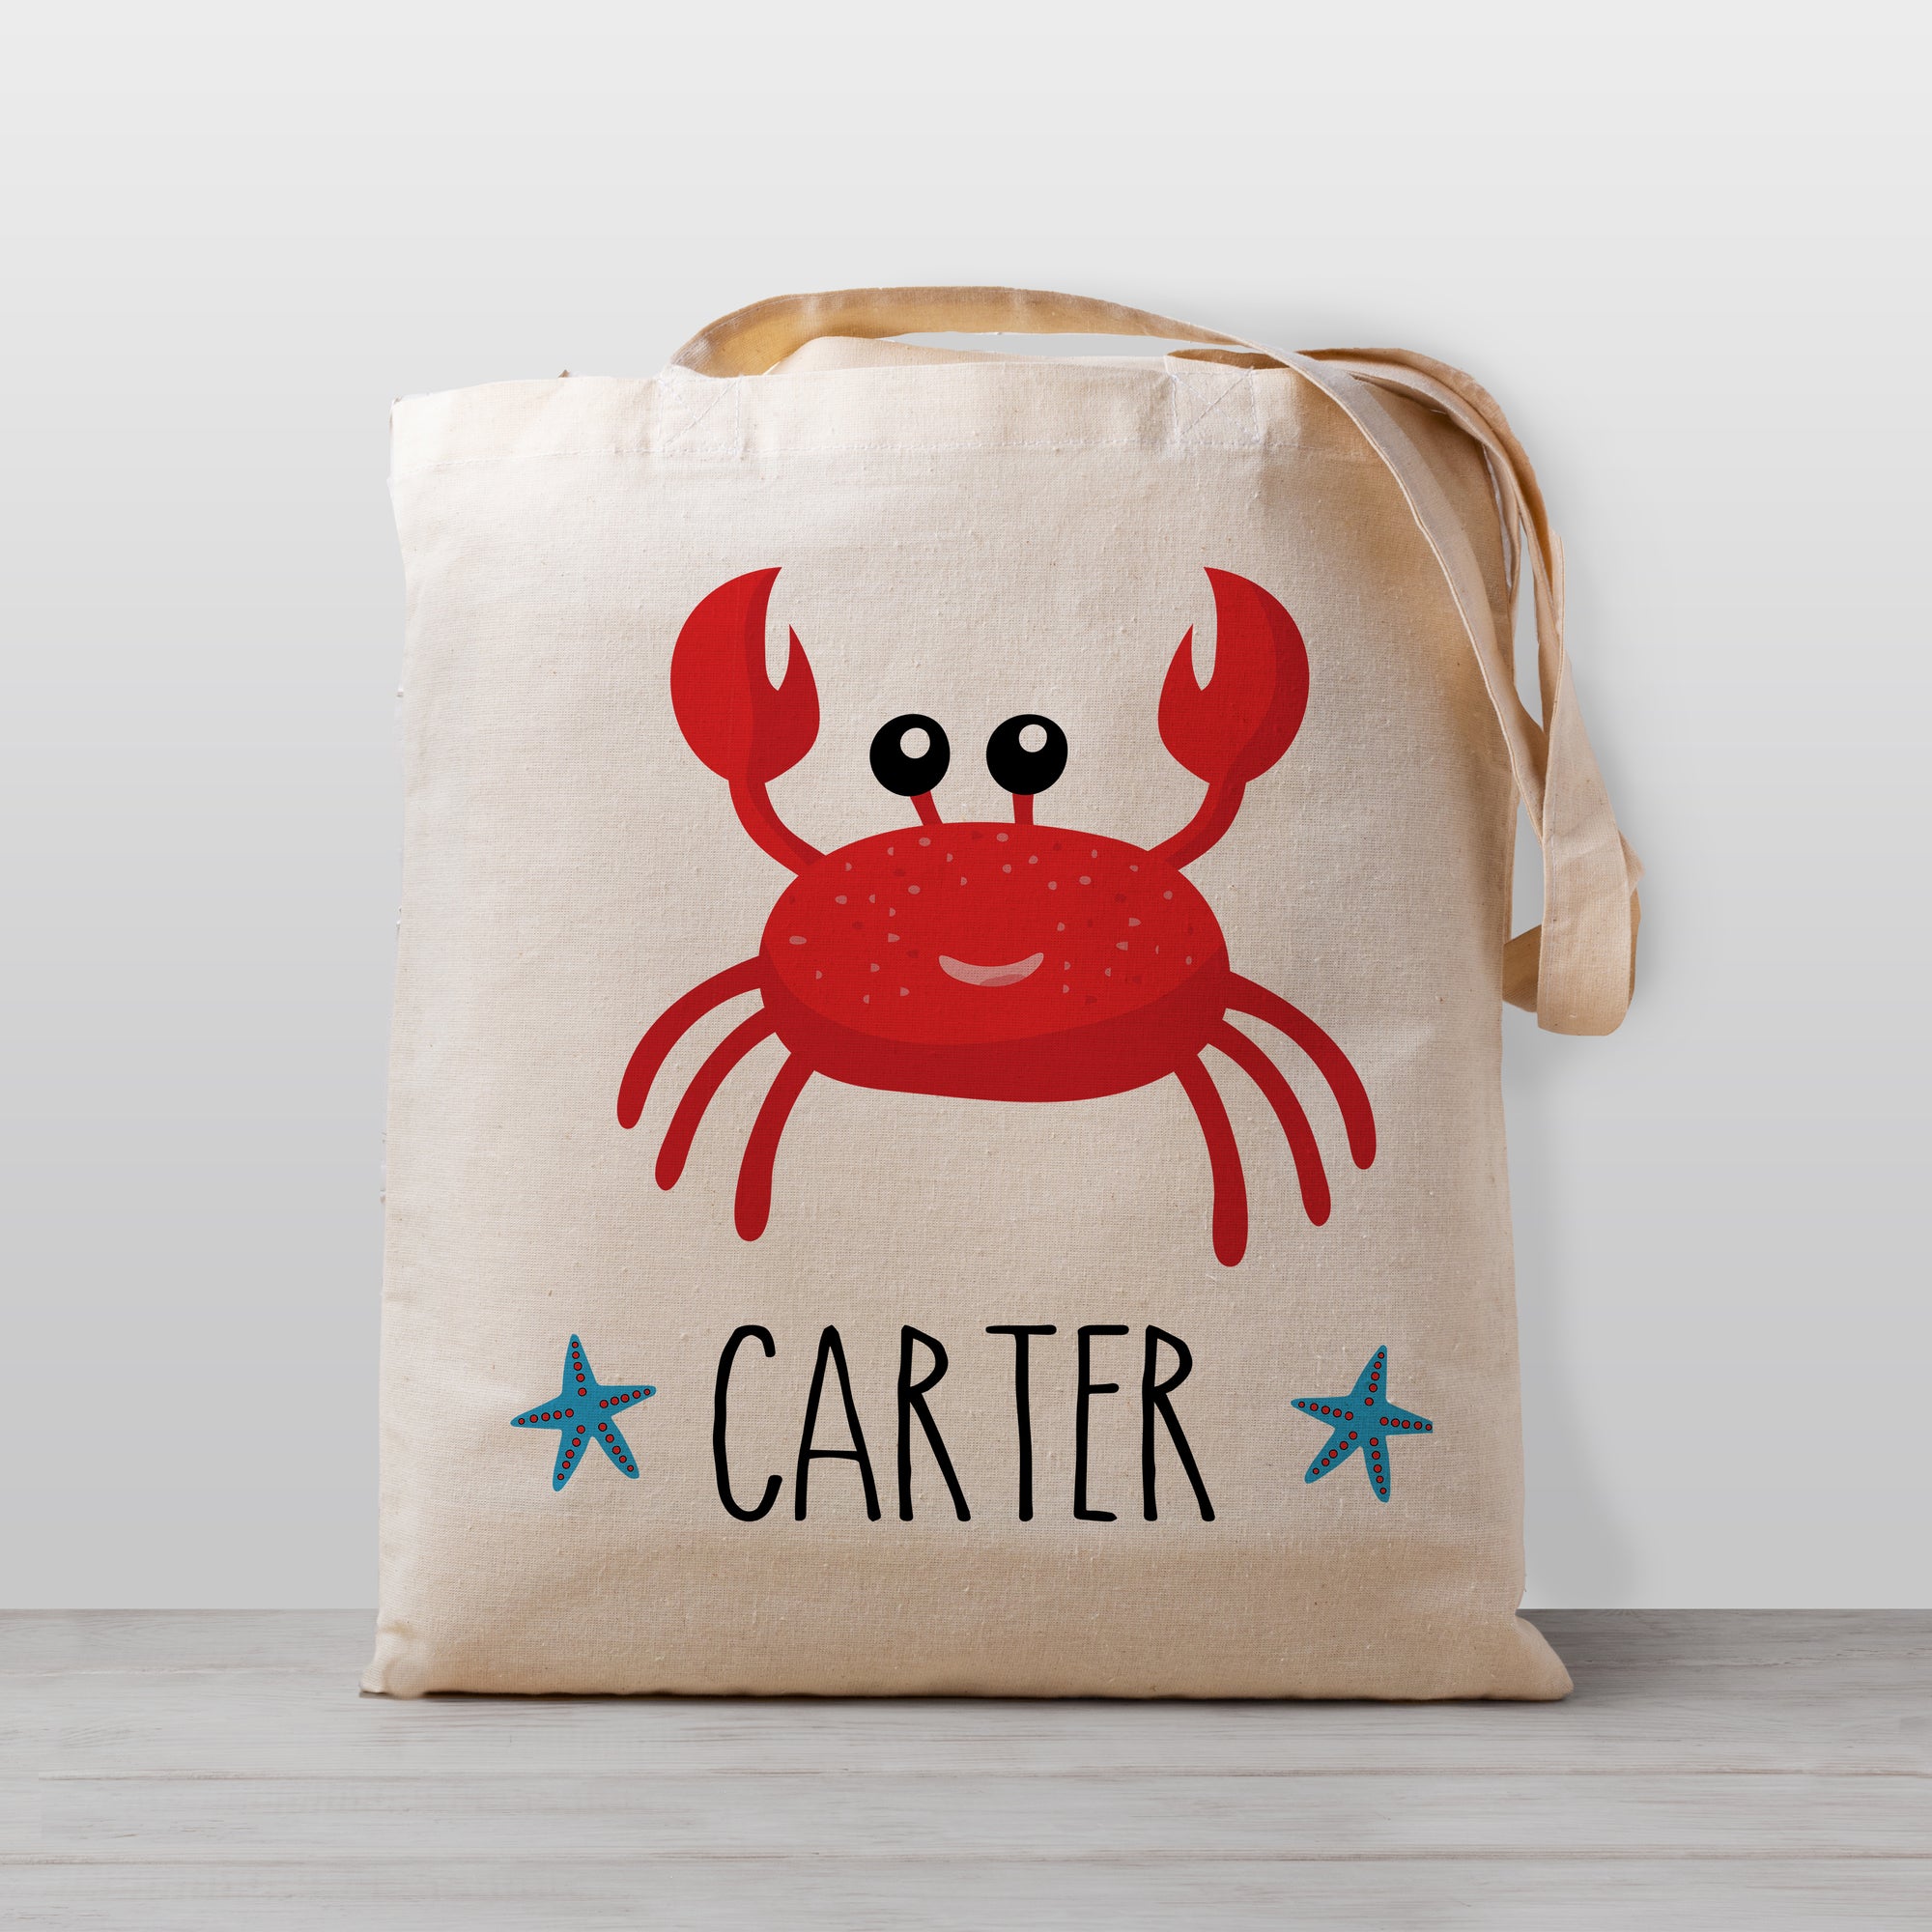 Cute crab tote bag, perfect to carry your little ones things to the beach or pool. Makes a great library book bag or a tote for daycare, preschool, or kindergarten, 100% cotton canvas